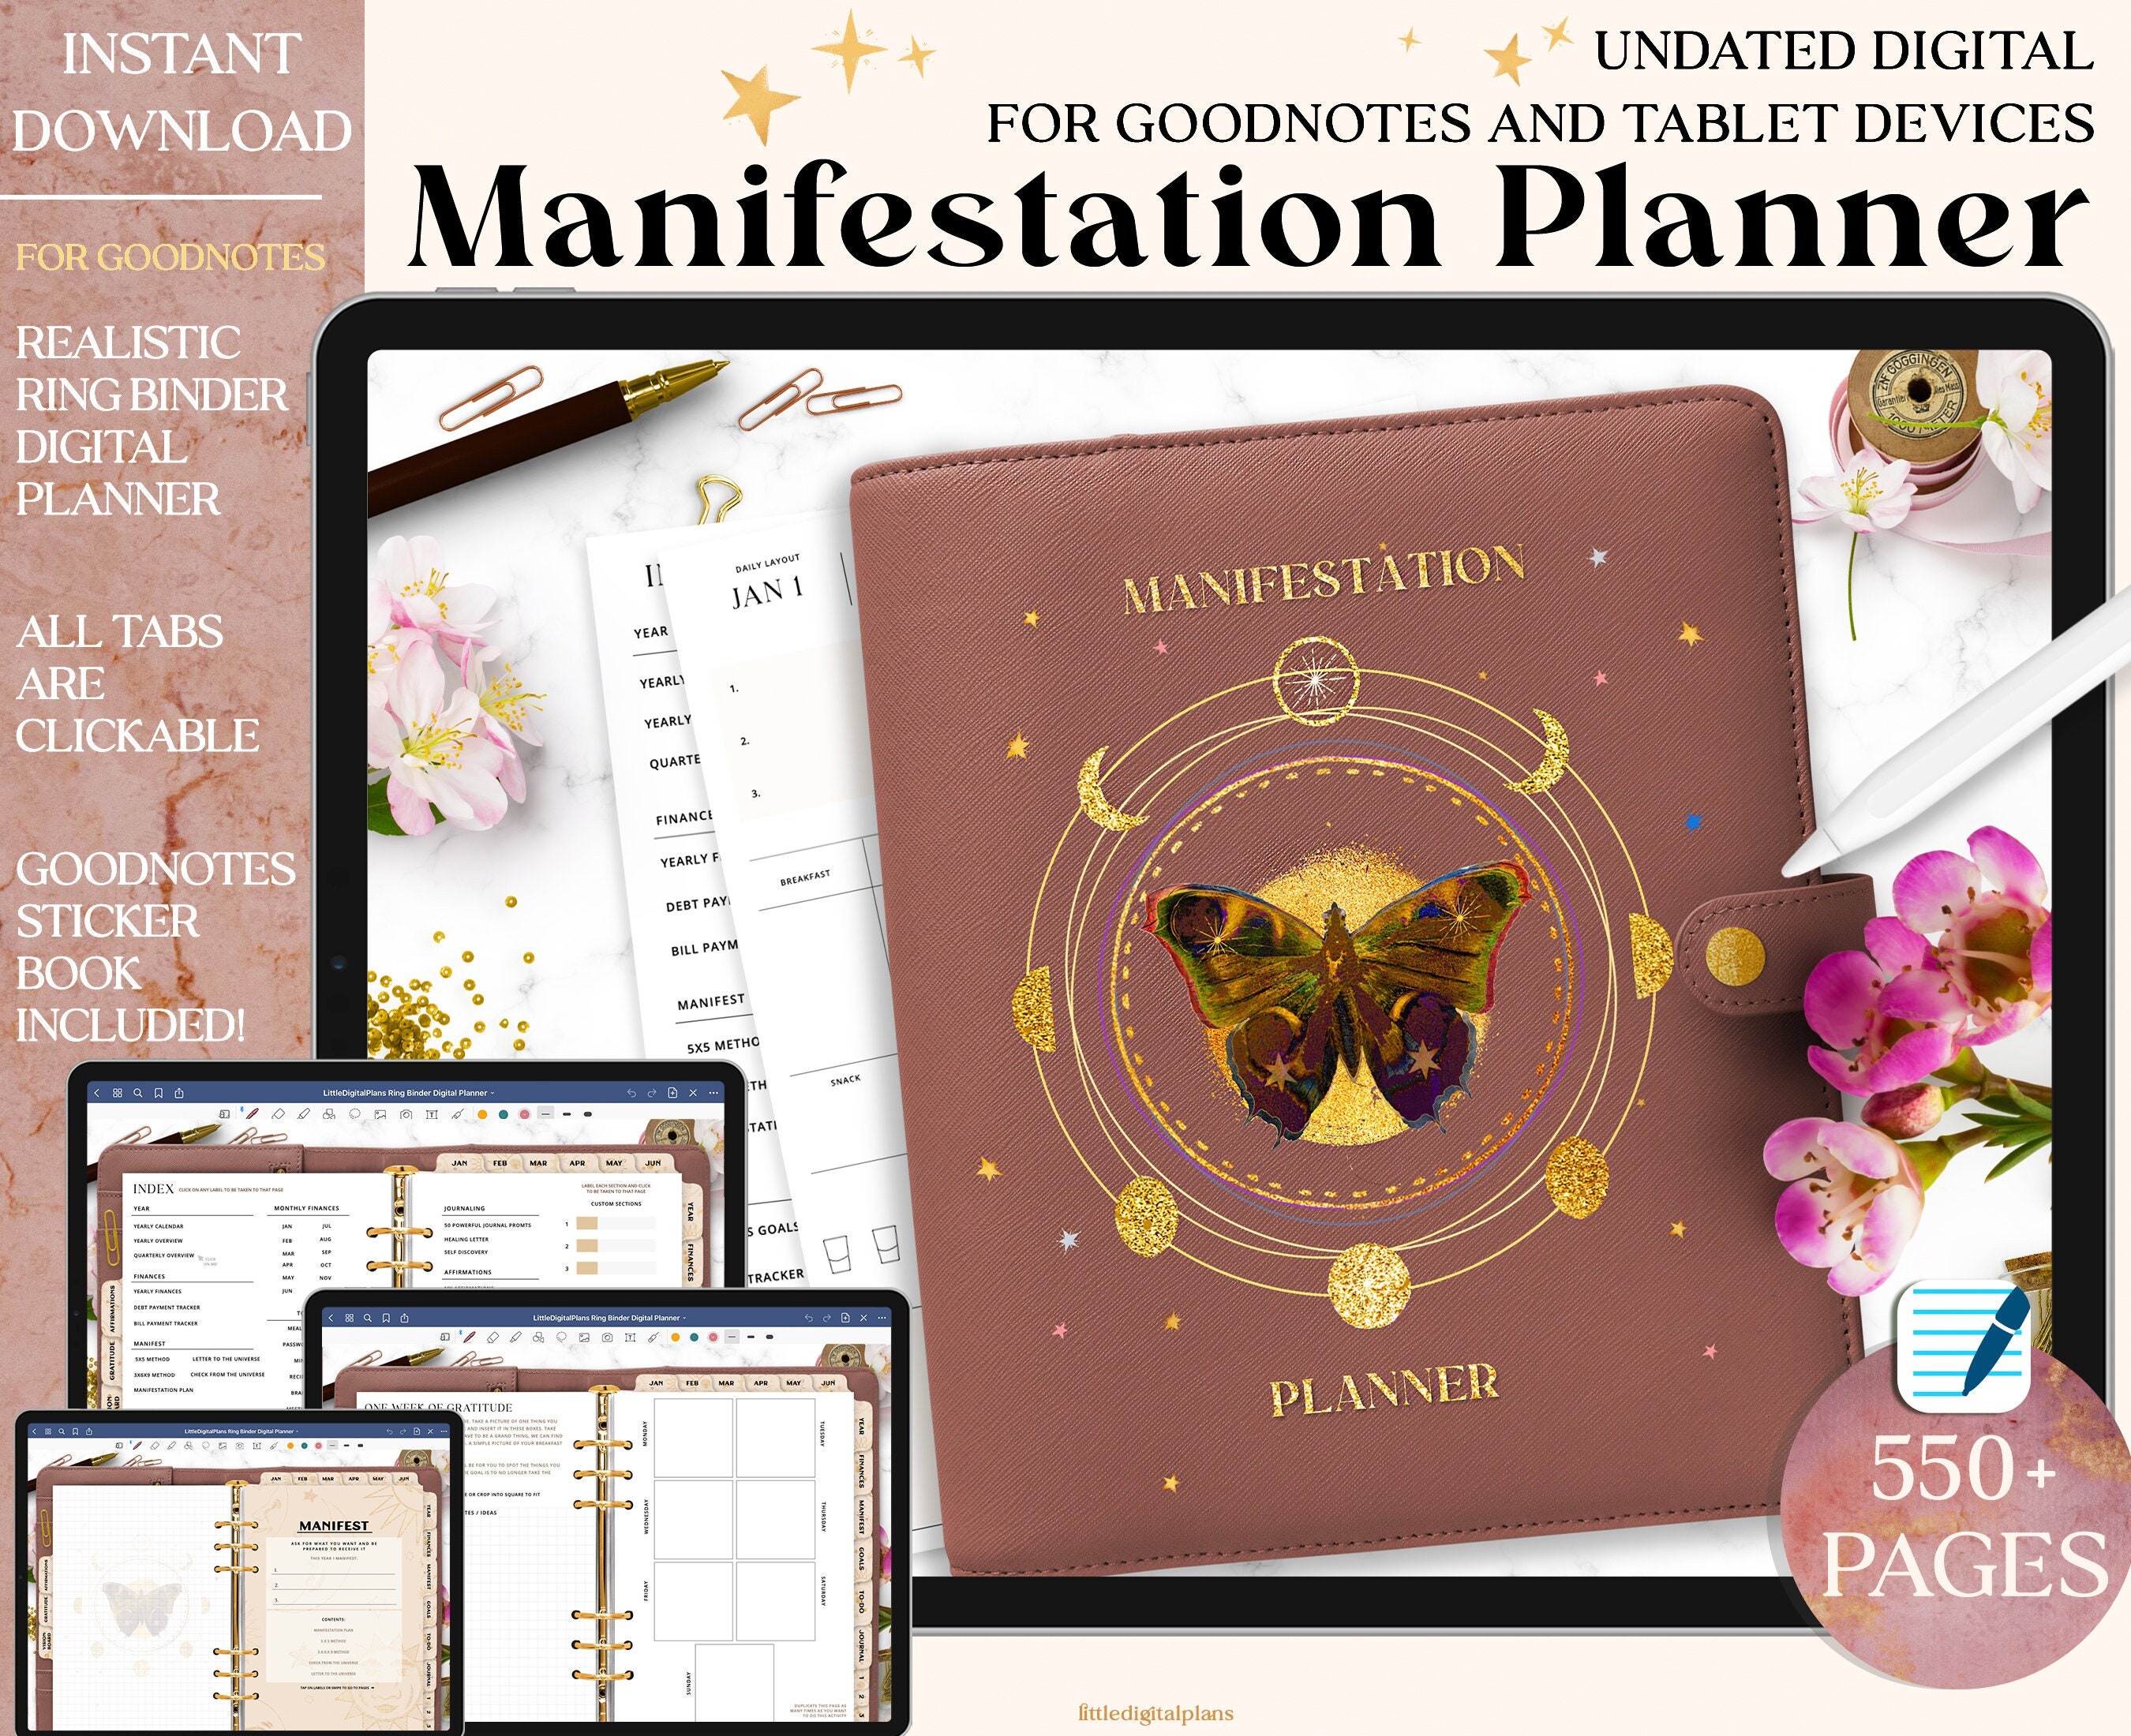 Mermaid Ladyship Logbook And Merrymaid Diary Planners: Law Of Attraction  And Time Management With Louis Vuit…